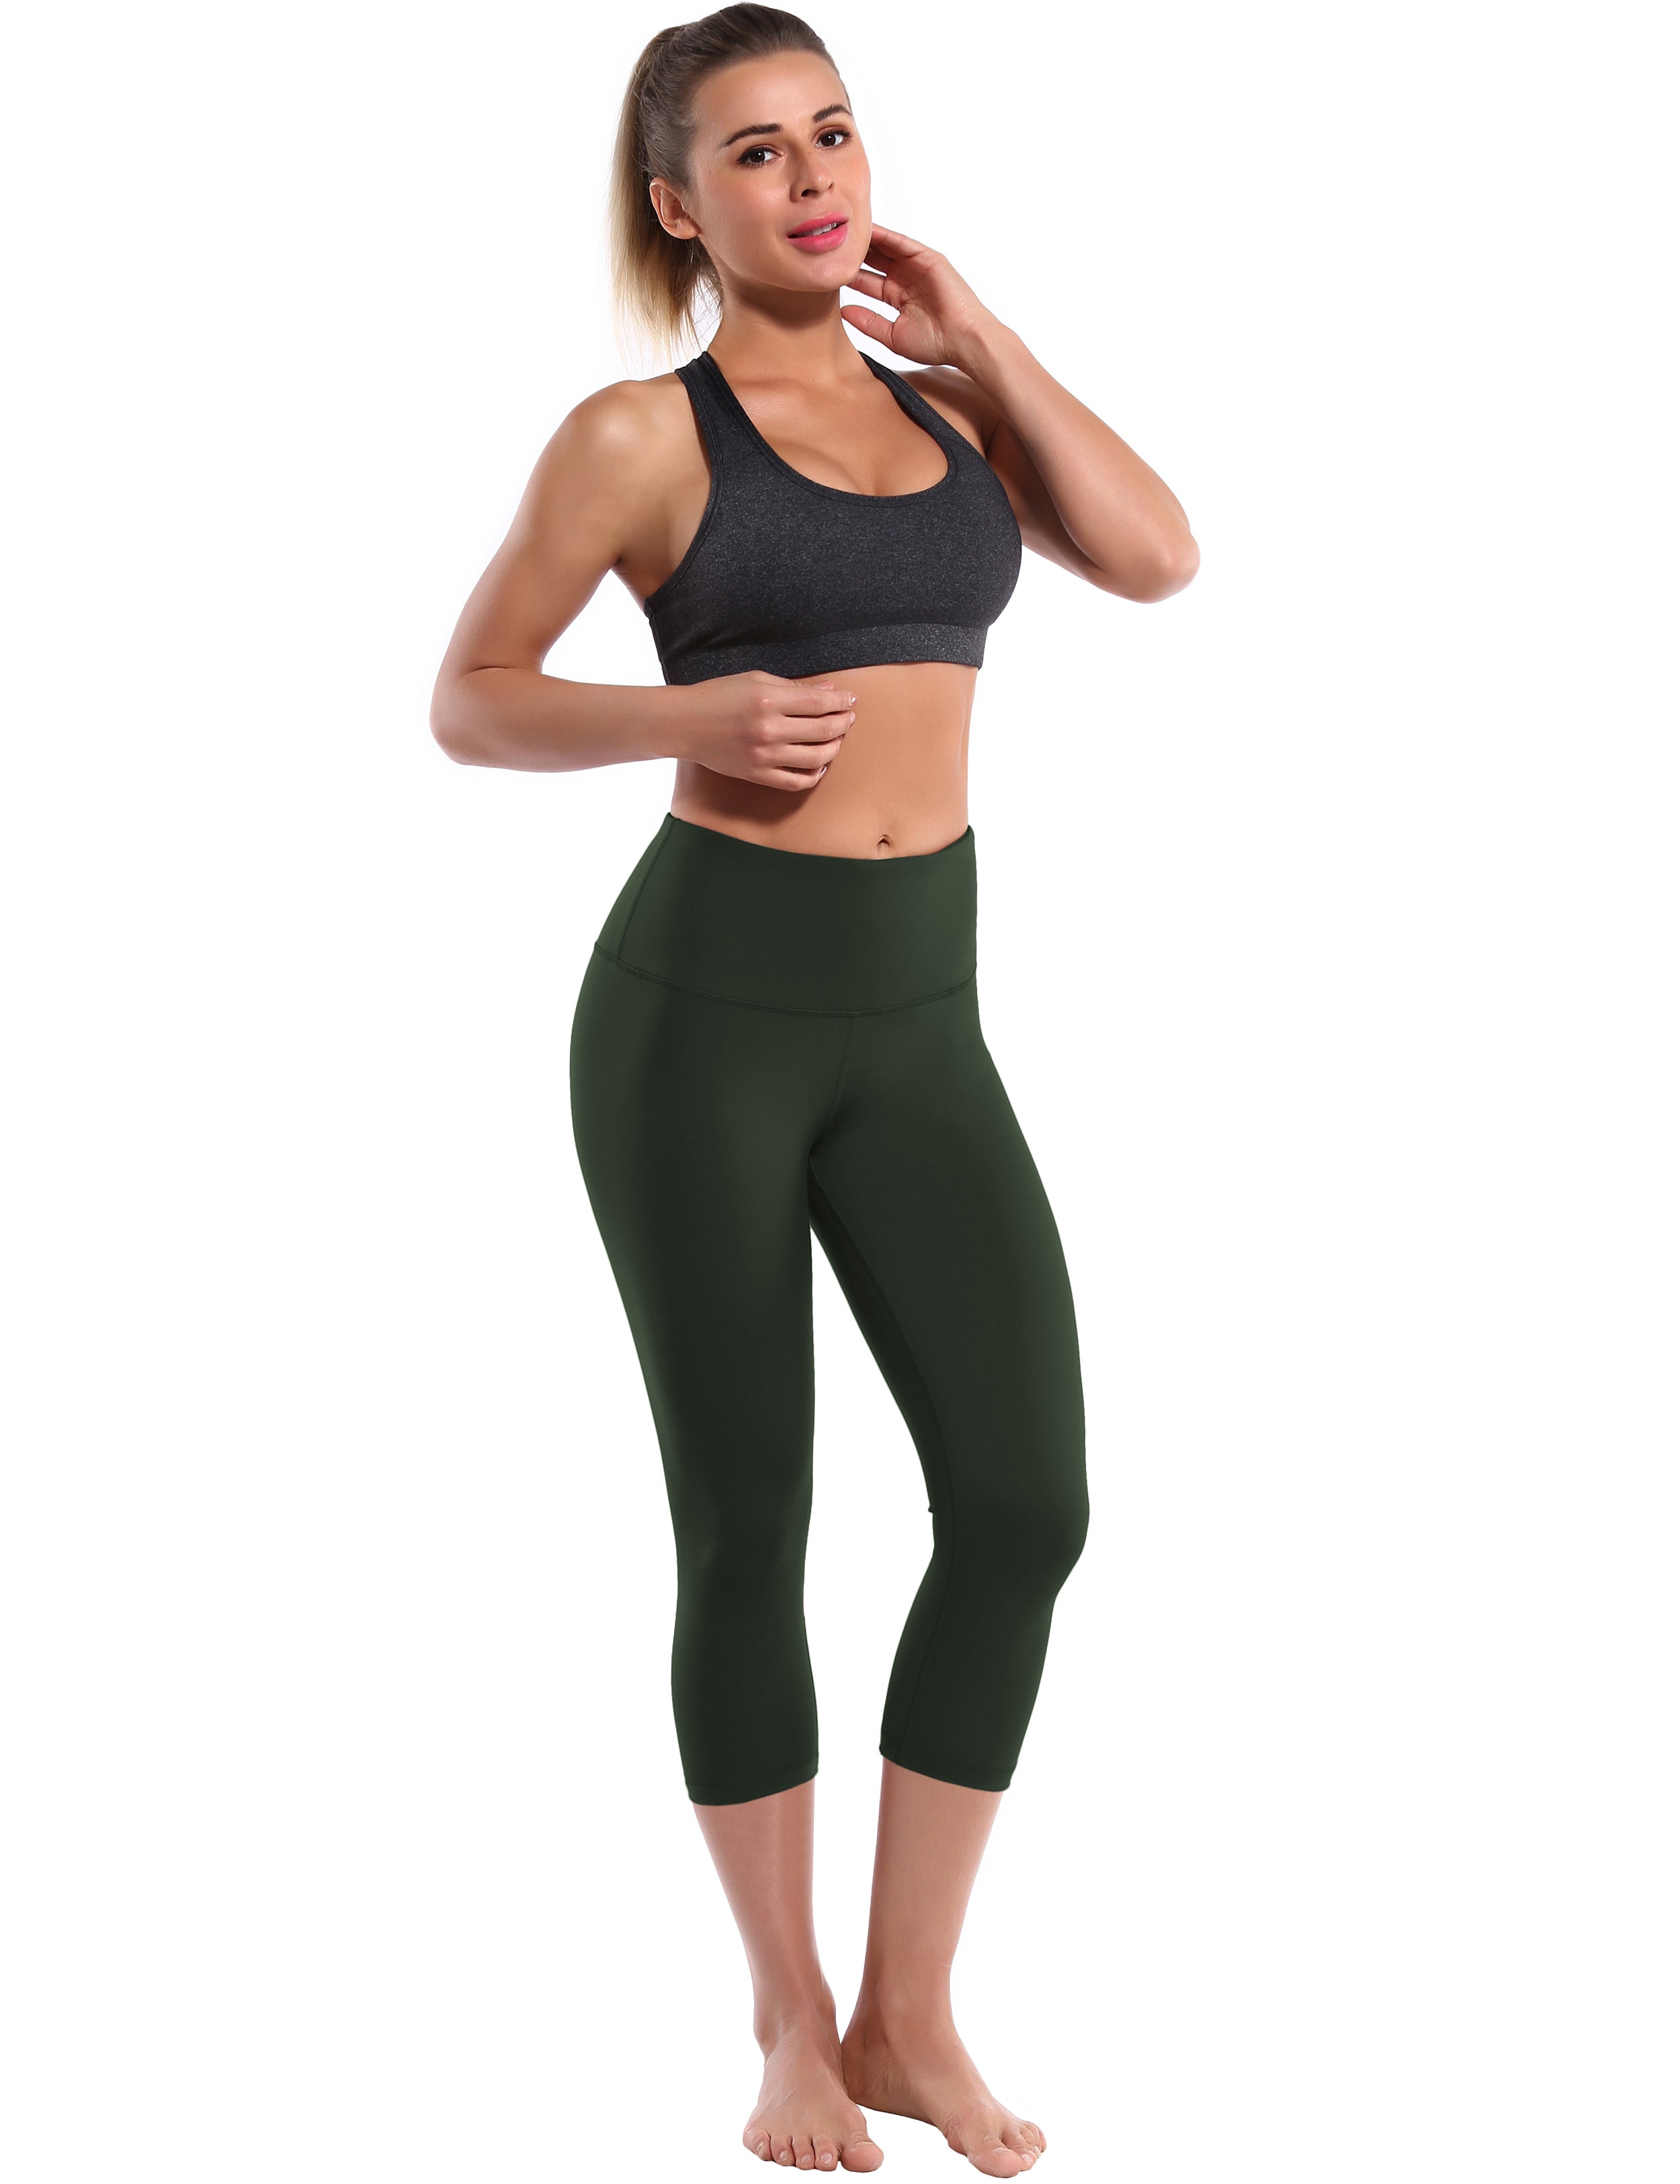 19" High Waist Crop Tight Capris olivegray 75%Nylon/25%Spandex Fabric doesn't attract lint easily 4-way stretch No see-through Moisture-wicking Tummy control Inner pocket